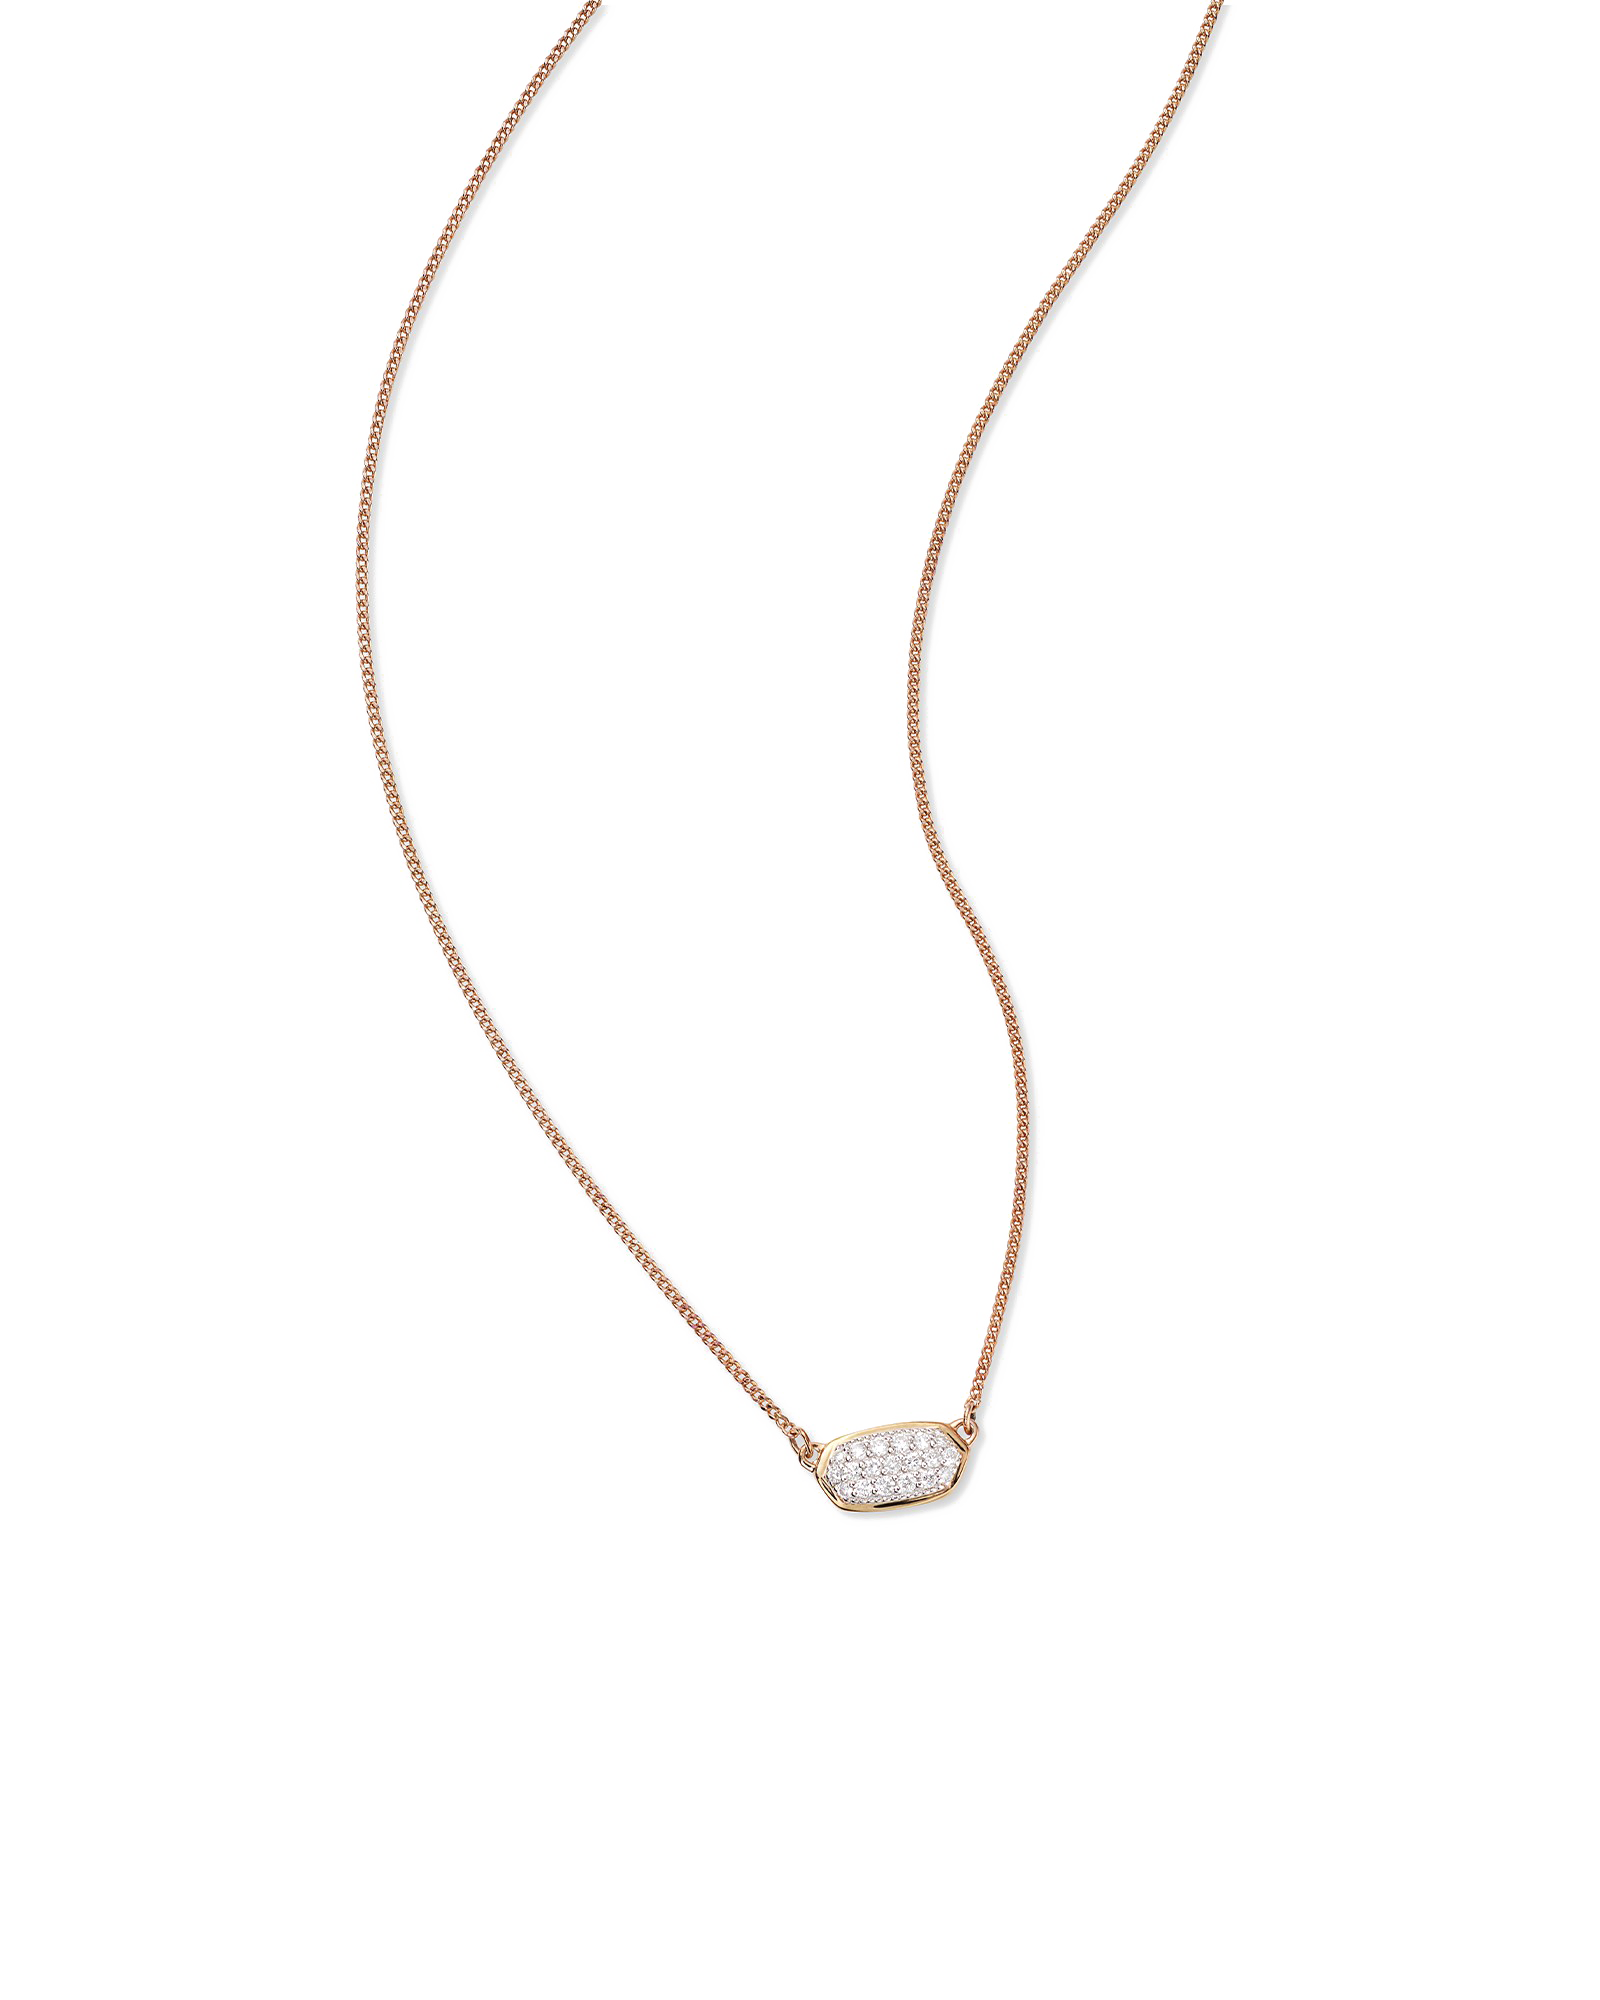 Download PNG image - Pendant Necklace PNG Image 